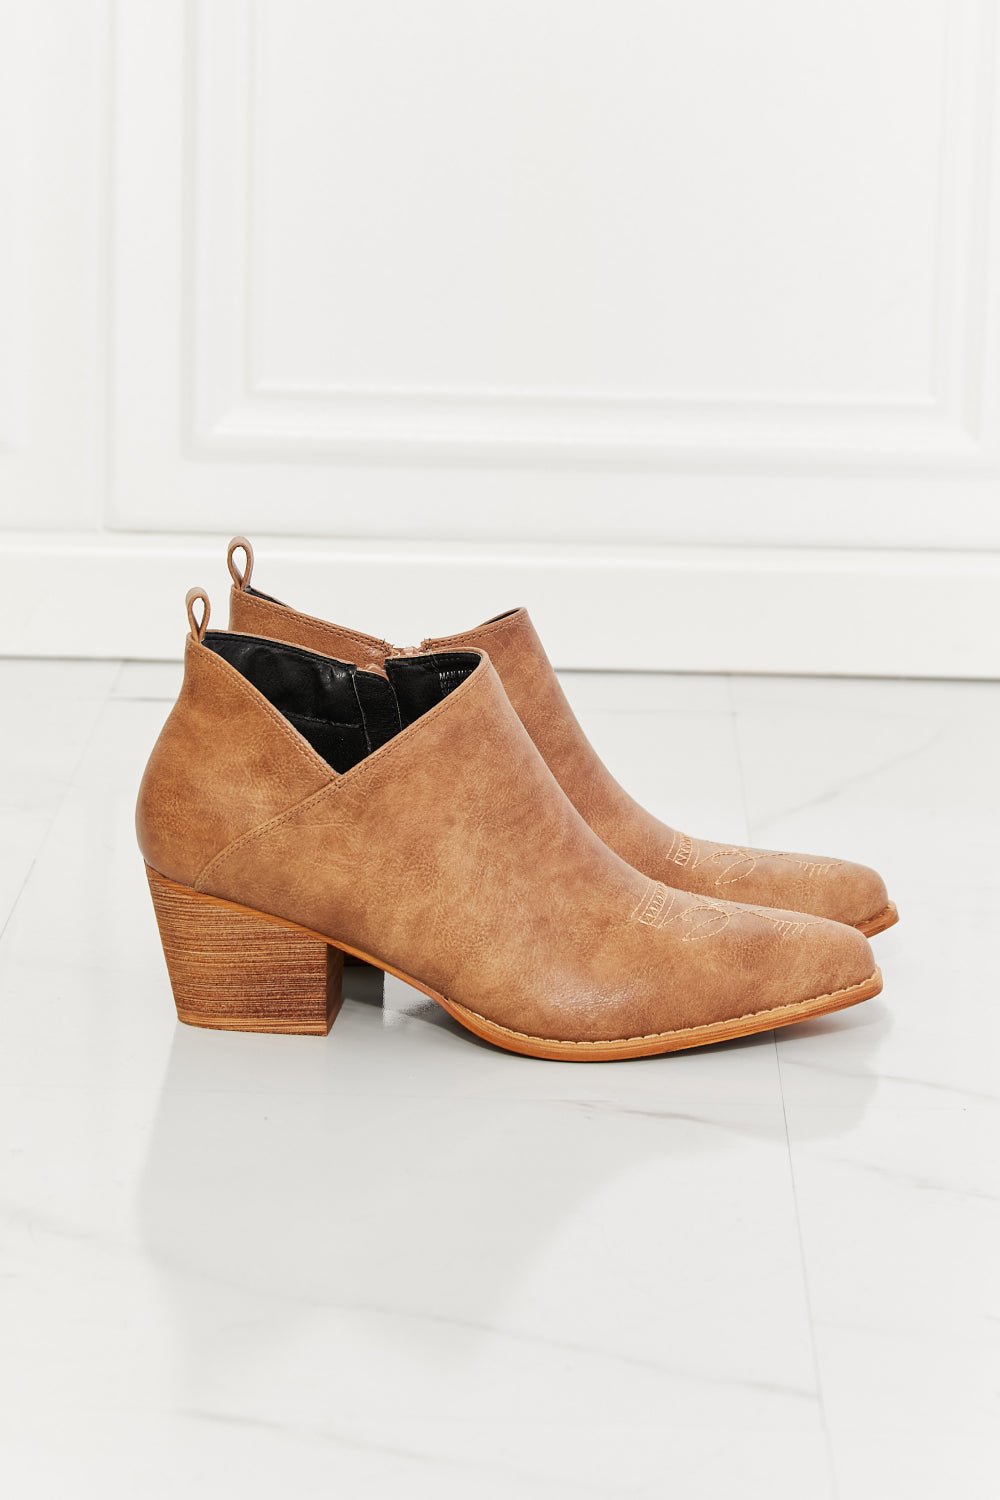 MMShoes Trust Yourself Embroidered Crossover Cowboy Bootie in Caramel - pvmark